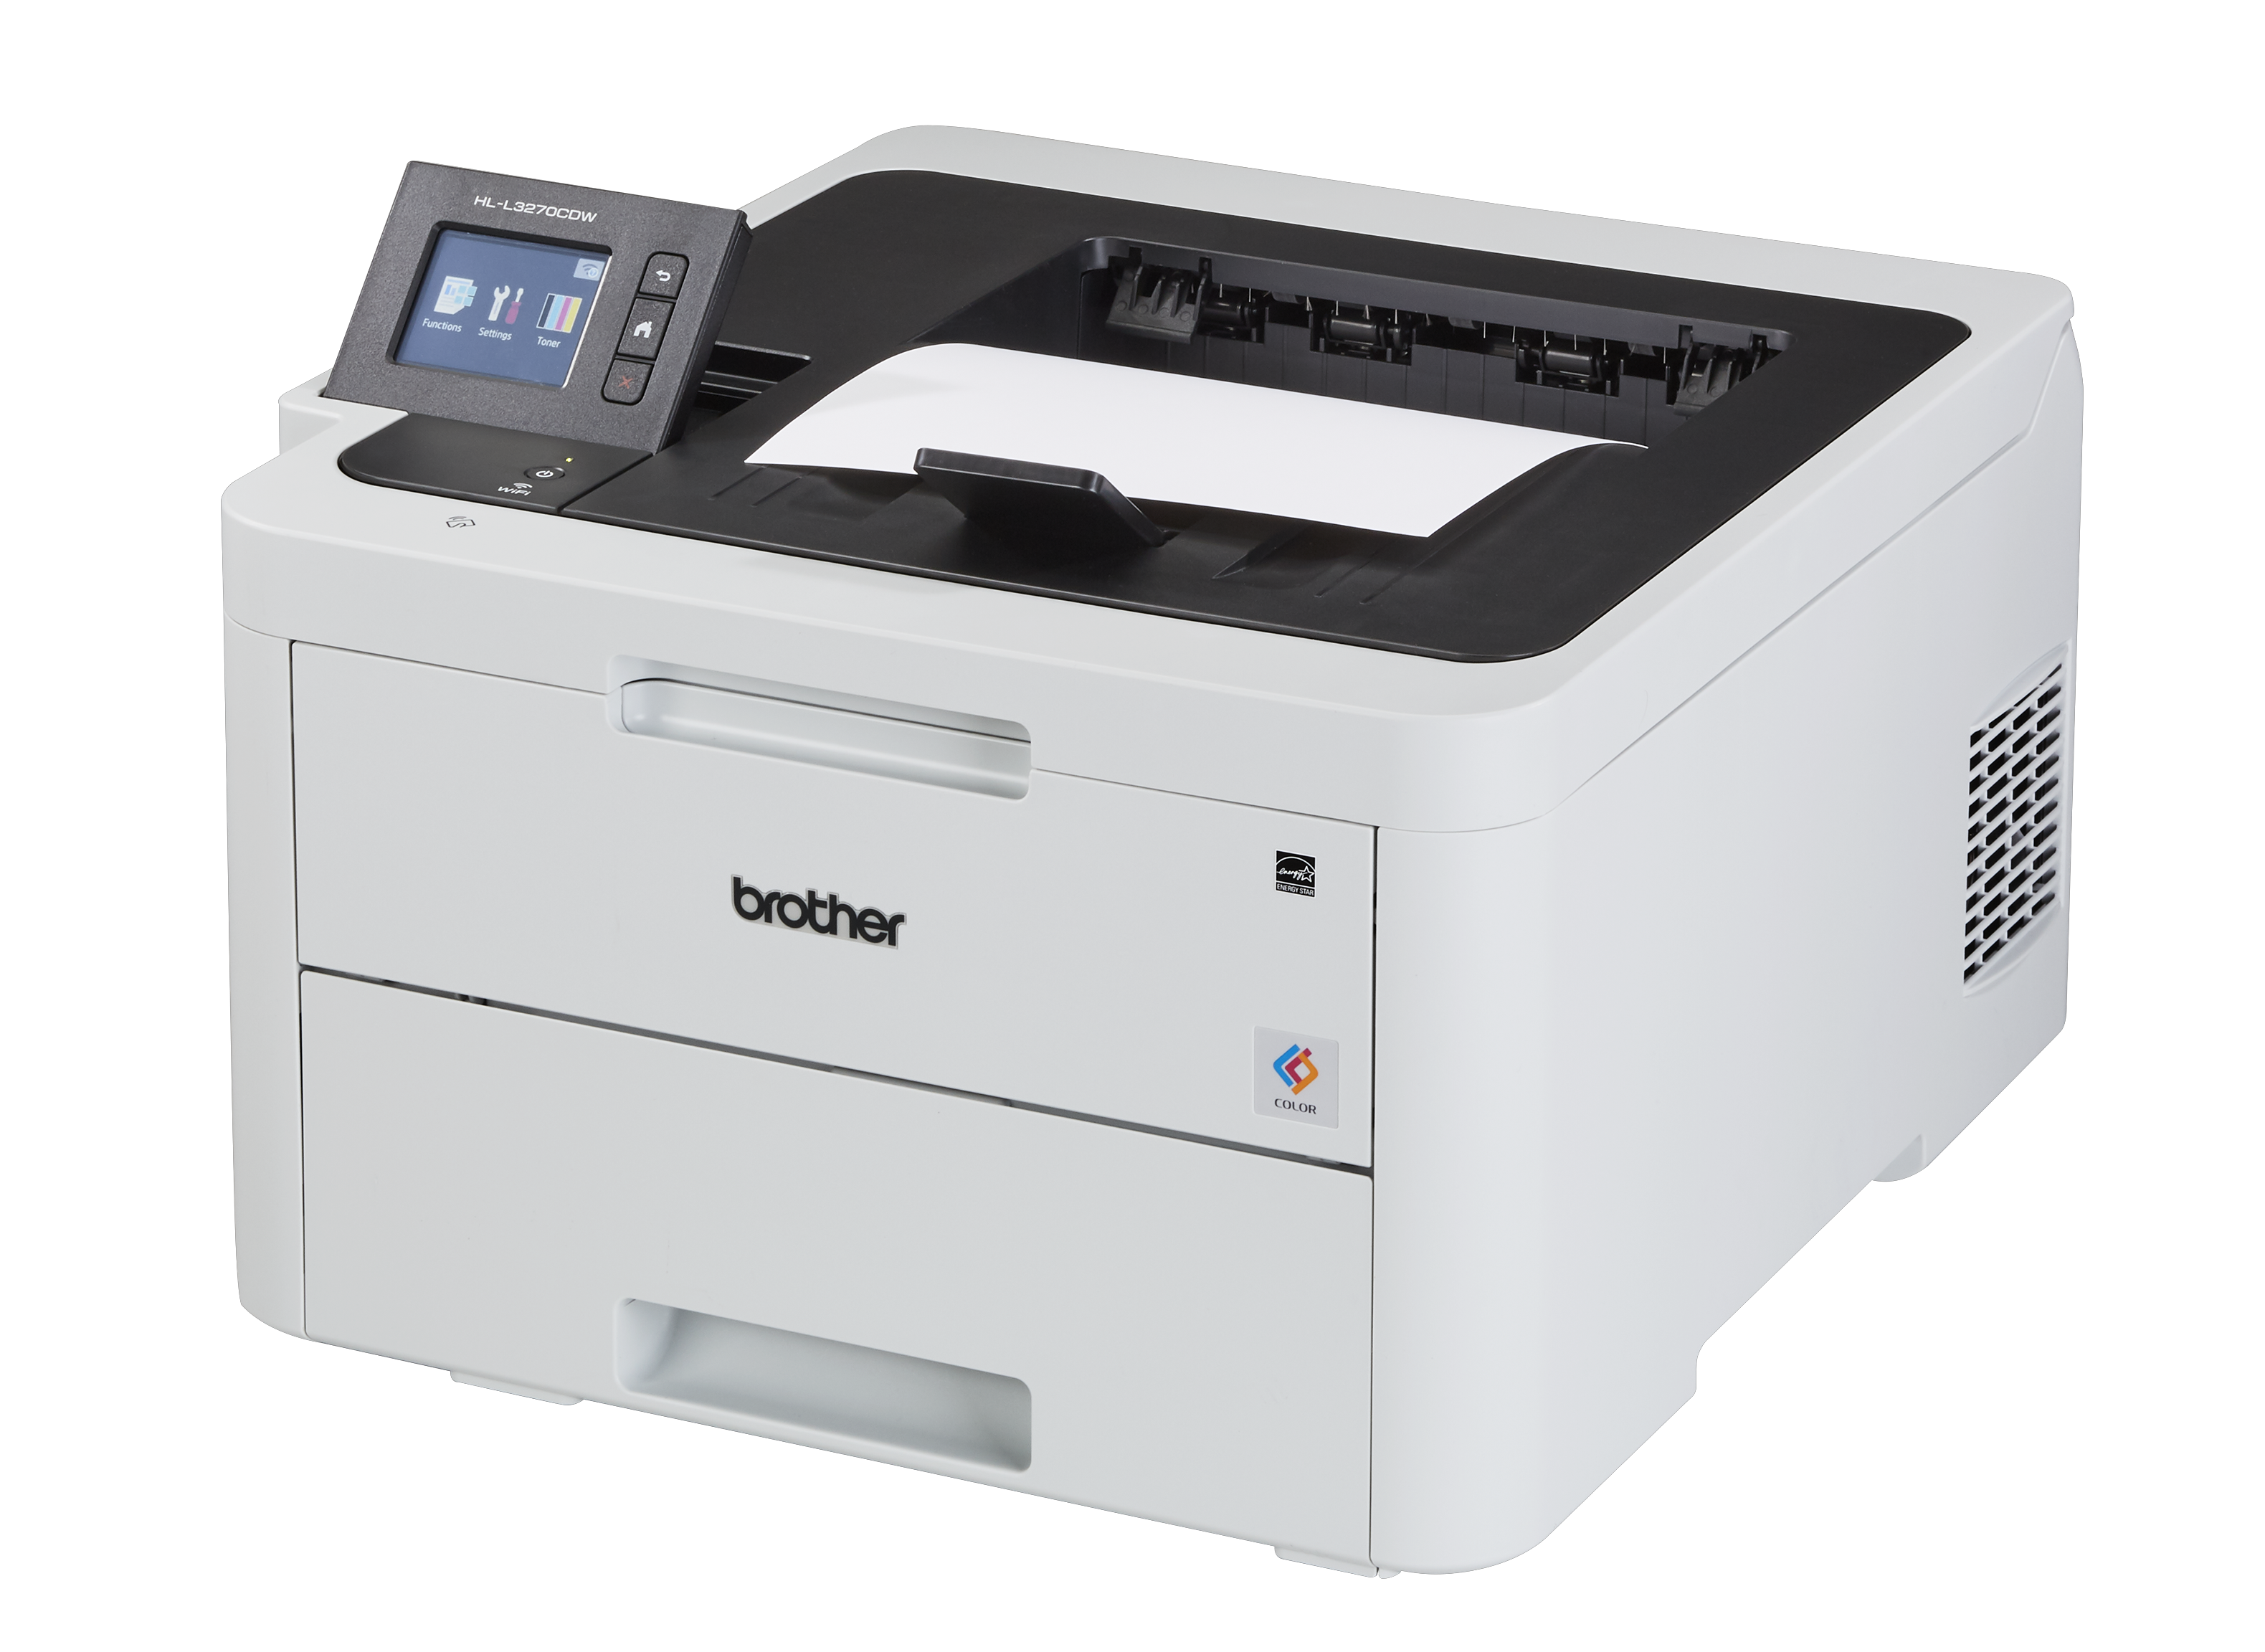 Brother LED Printer Review